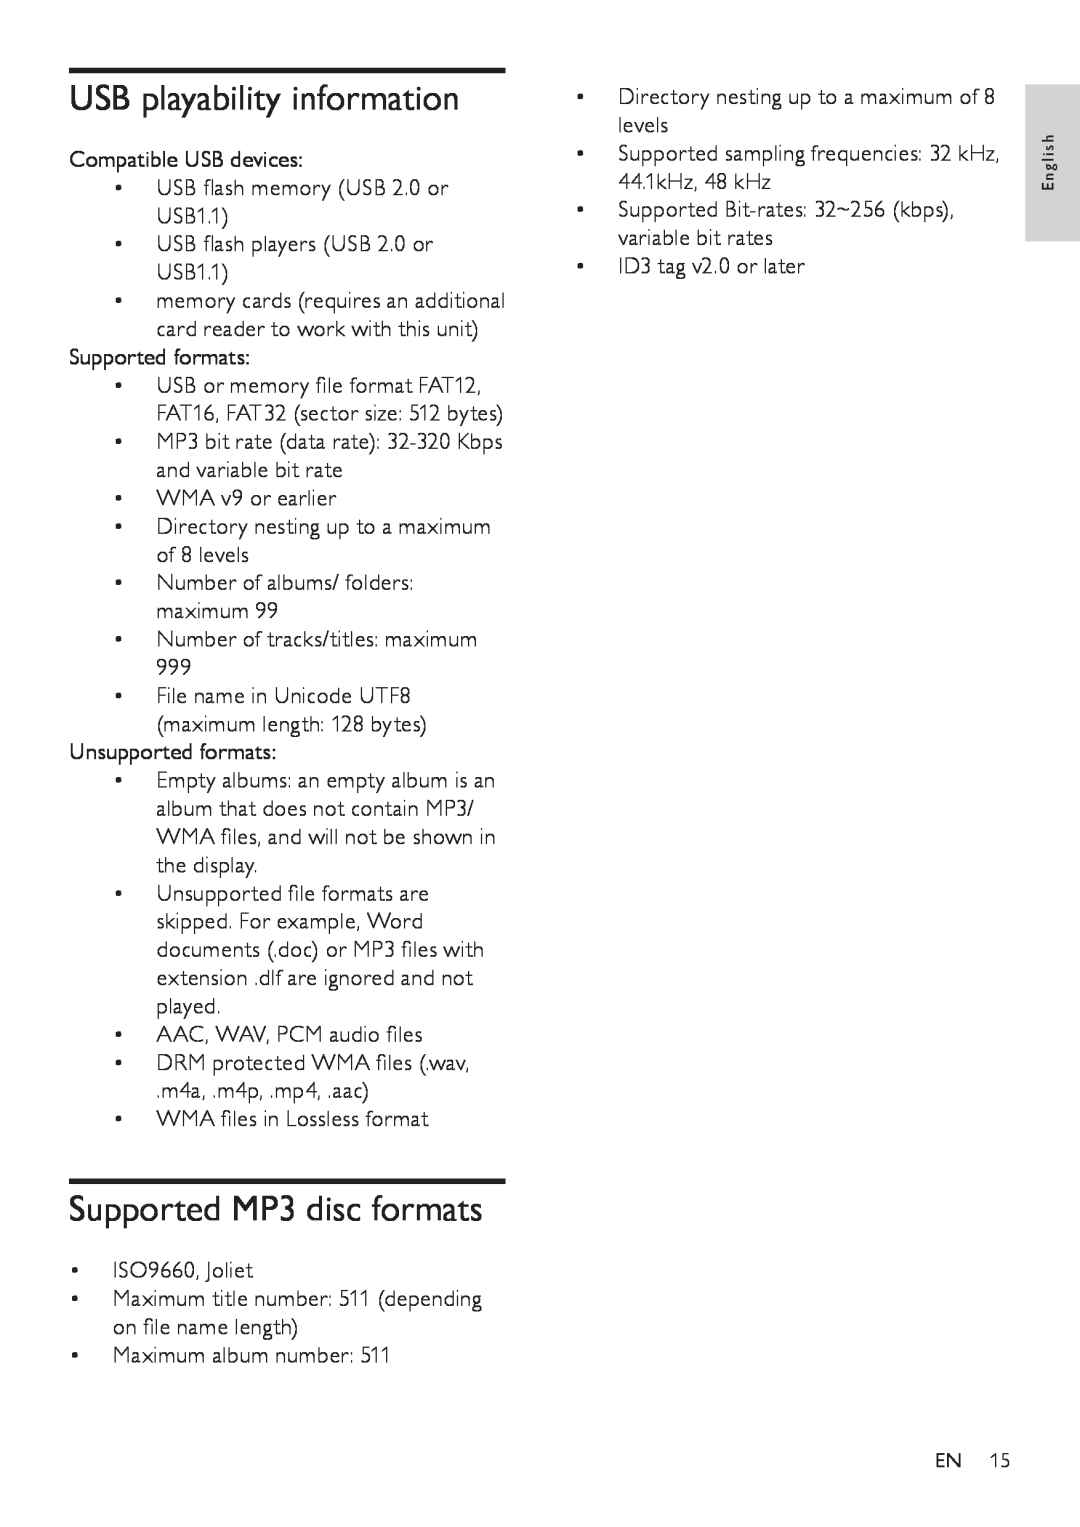 Philips FWM208 user manual USB playability information, Supported MP3 disc formats 